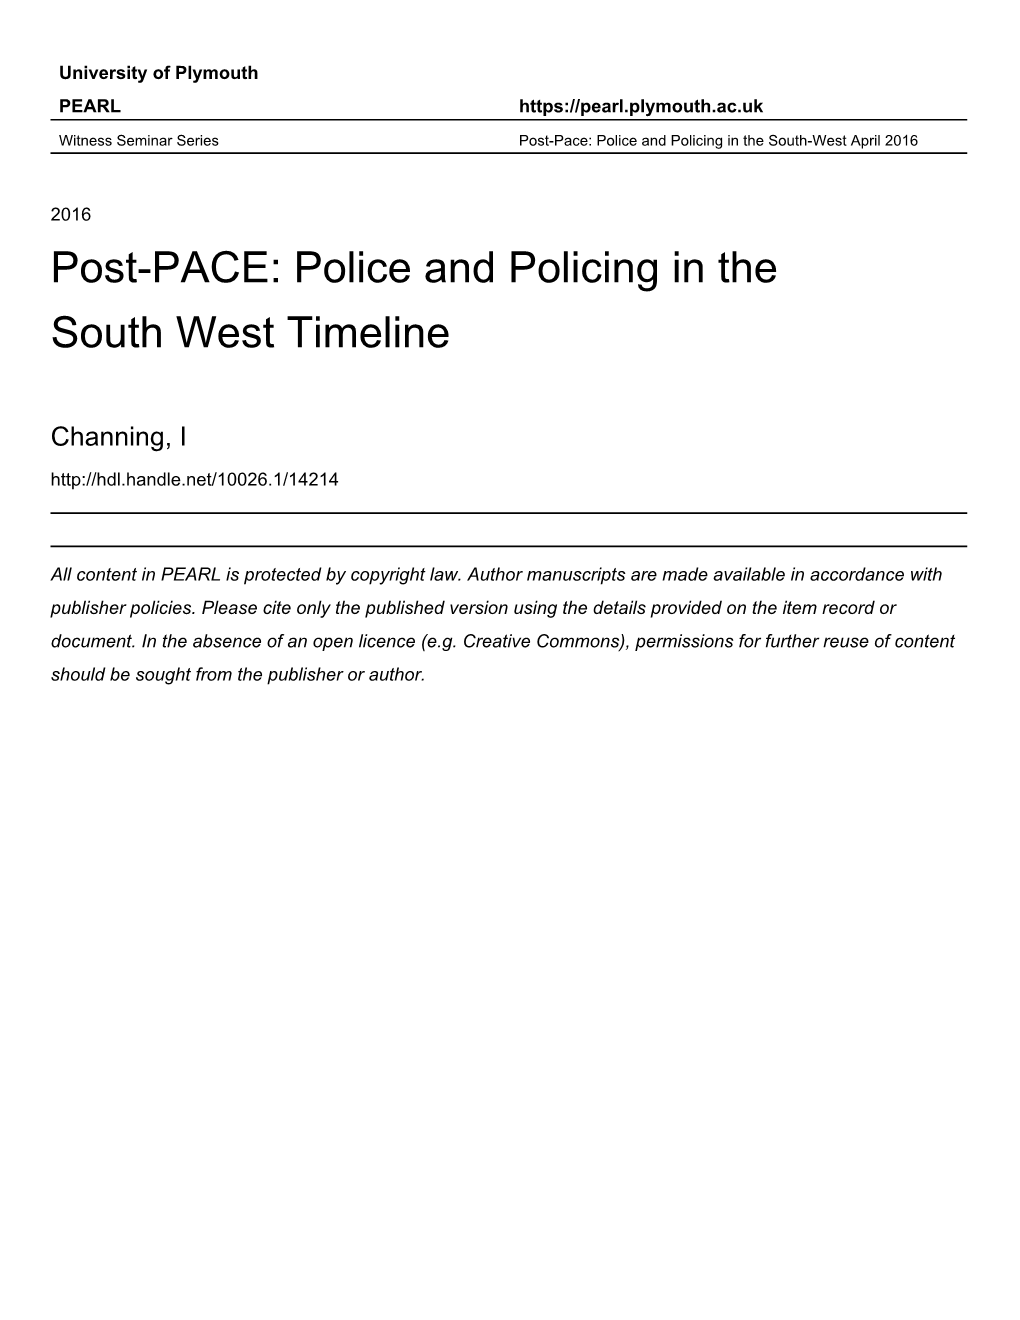 Post-PACE: Police and Policing in the South West Timeline